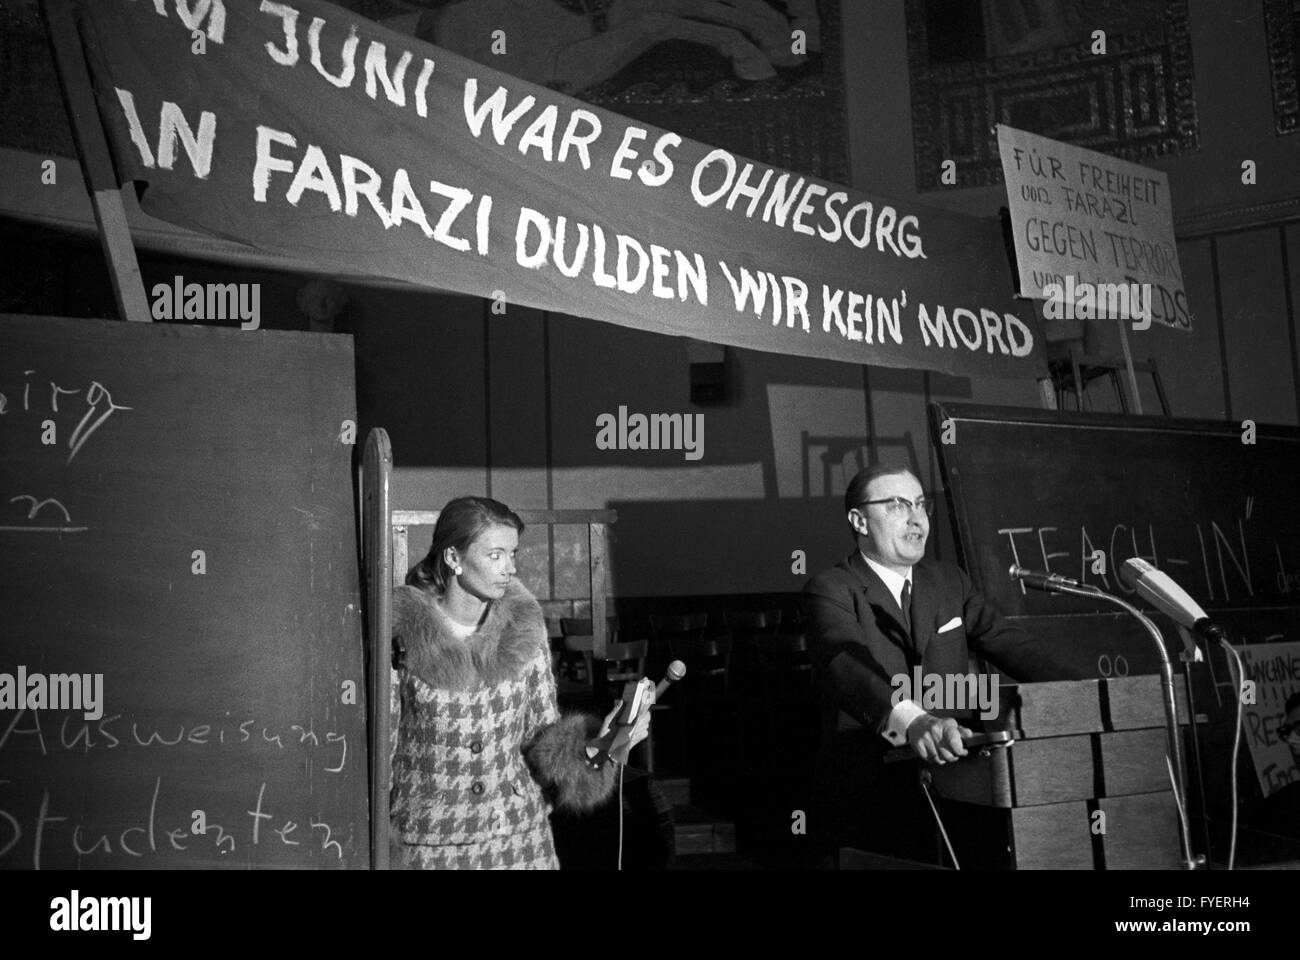 President of the University of Munich Prof. Carl Becker gives a statement during a Teach-in on 19 December 1967 and ensures that the Iranian student Farazi will be protected by the university. Farazi had neglected to leave Munich during the Shah visit in spring and asked for political asylum. Stock Photo